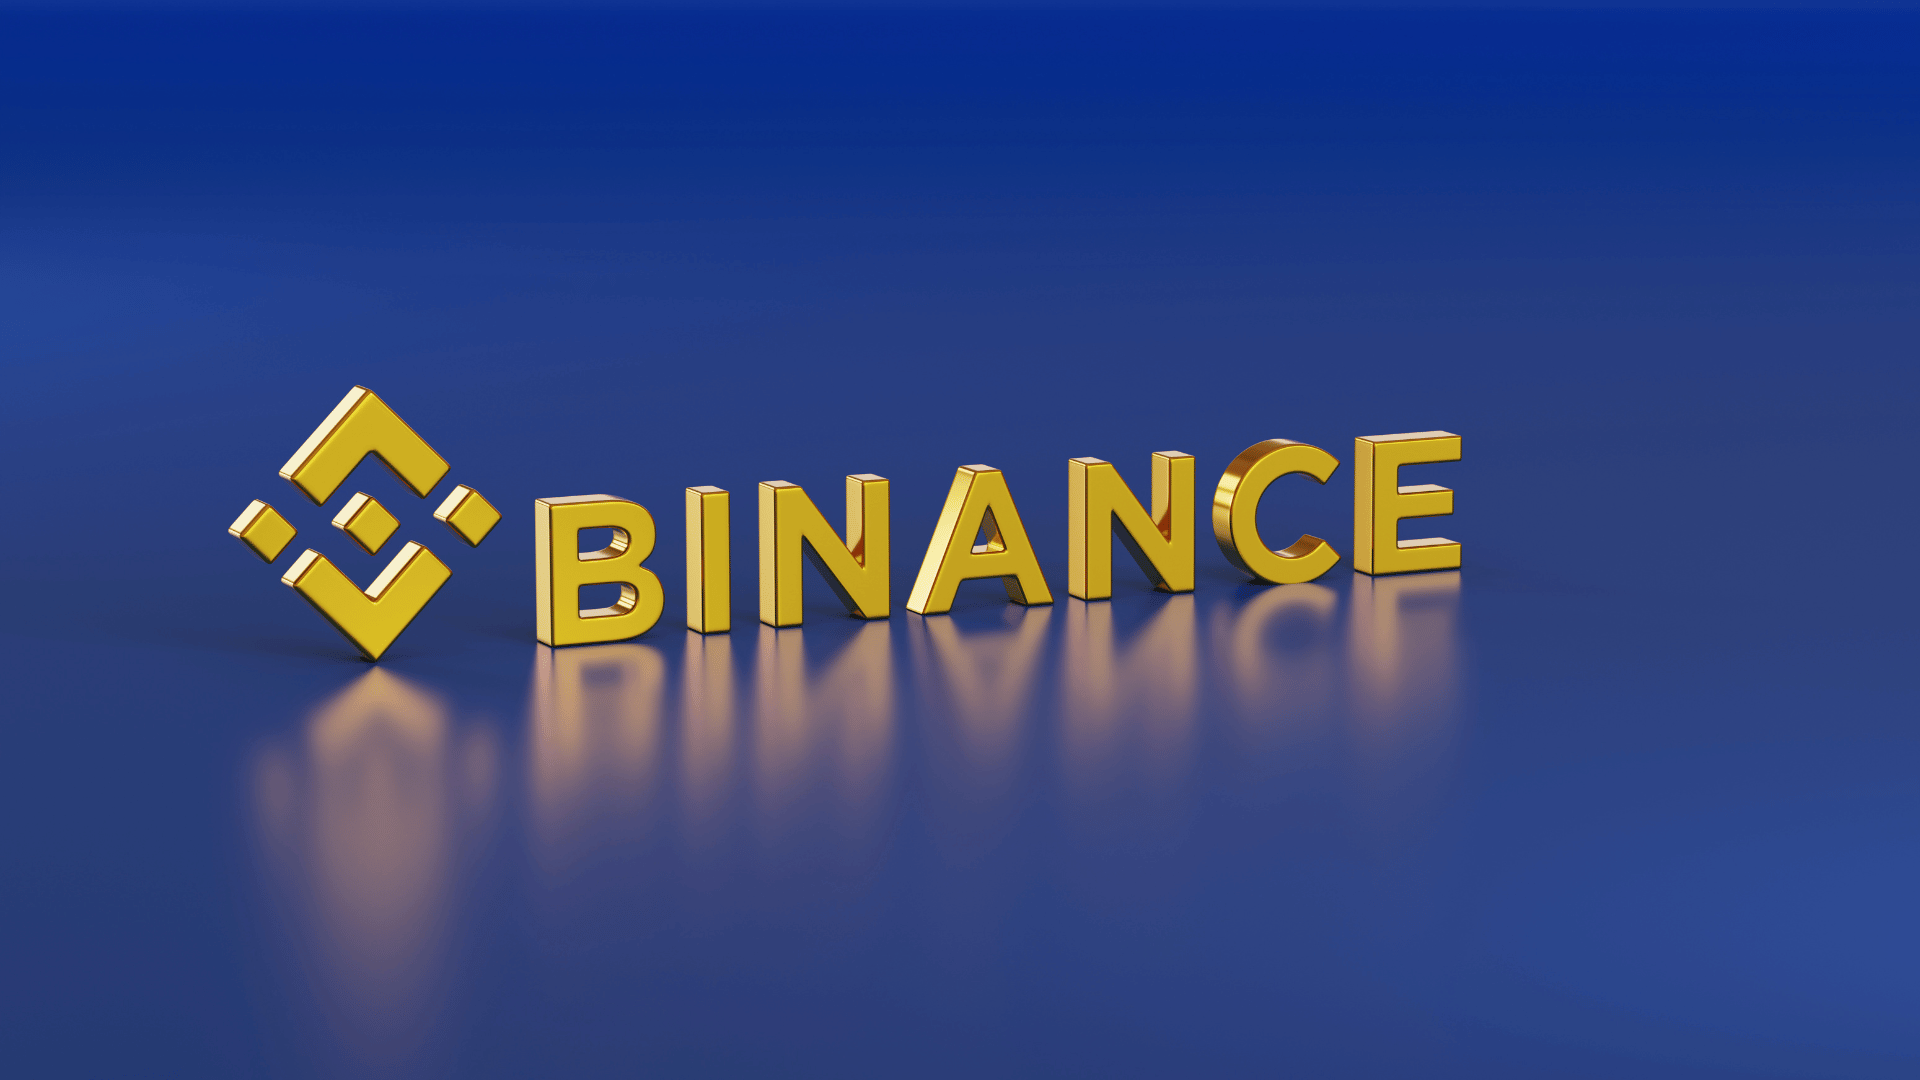 Cryptocurrency Giant Binance Agrees to $4.3 Billion Fine as CEO Pleads Guilty to Federal Charges